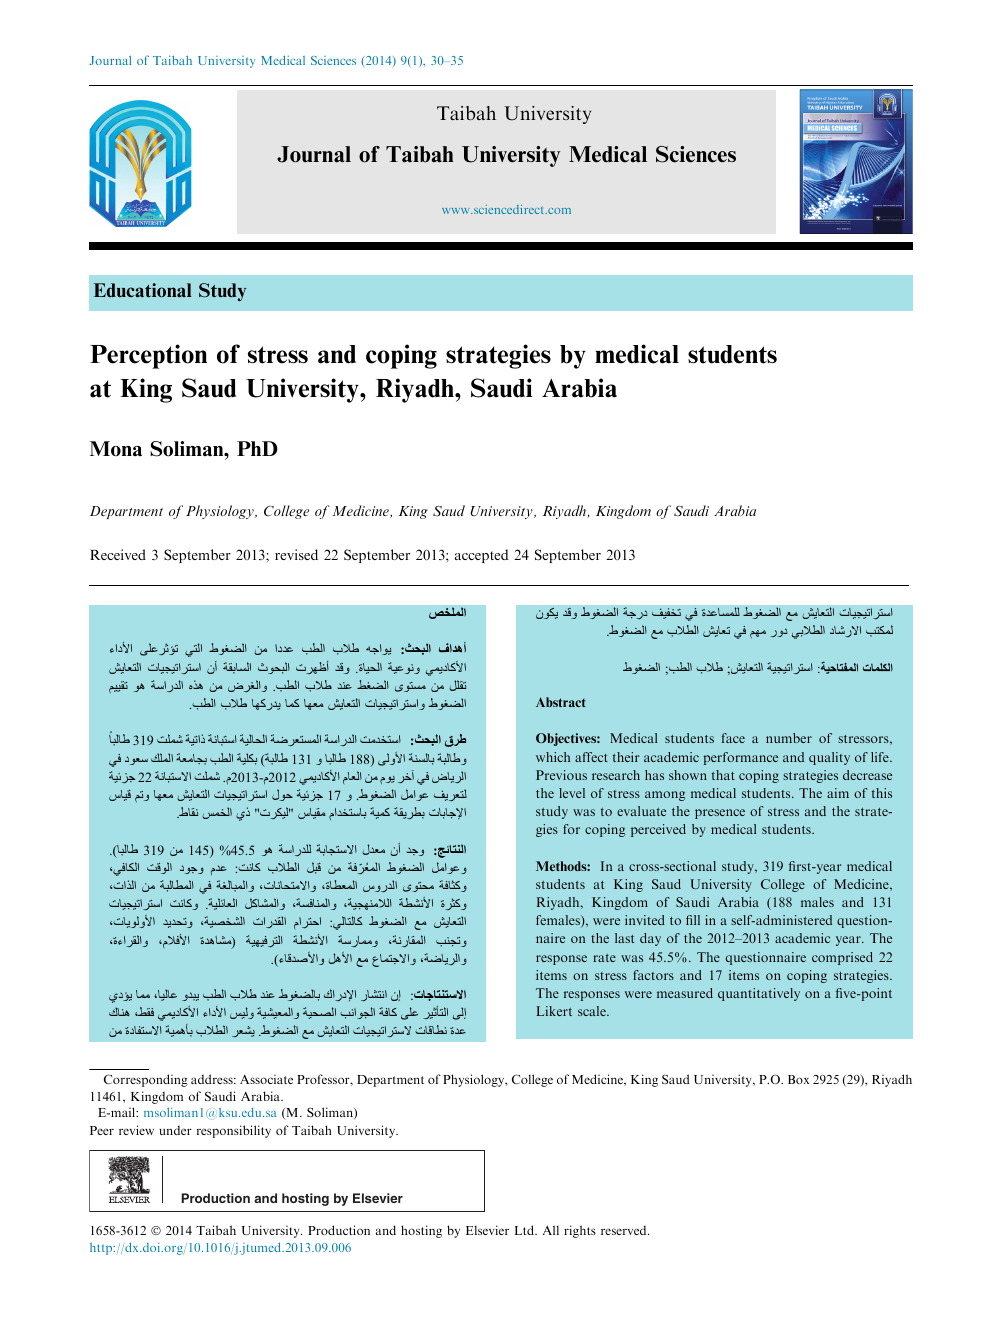 Perception Of Stress And Coping Strategies By Medical Students At King Saud University Riyadh Saudi Arabia Topic Of Research Paper In Educational Sciences Download Scholarly Article Pdf And Read For Free